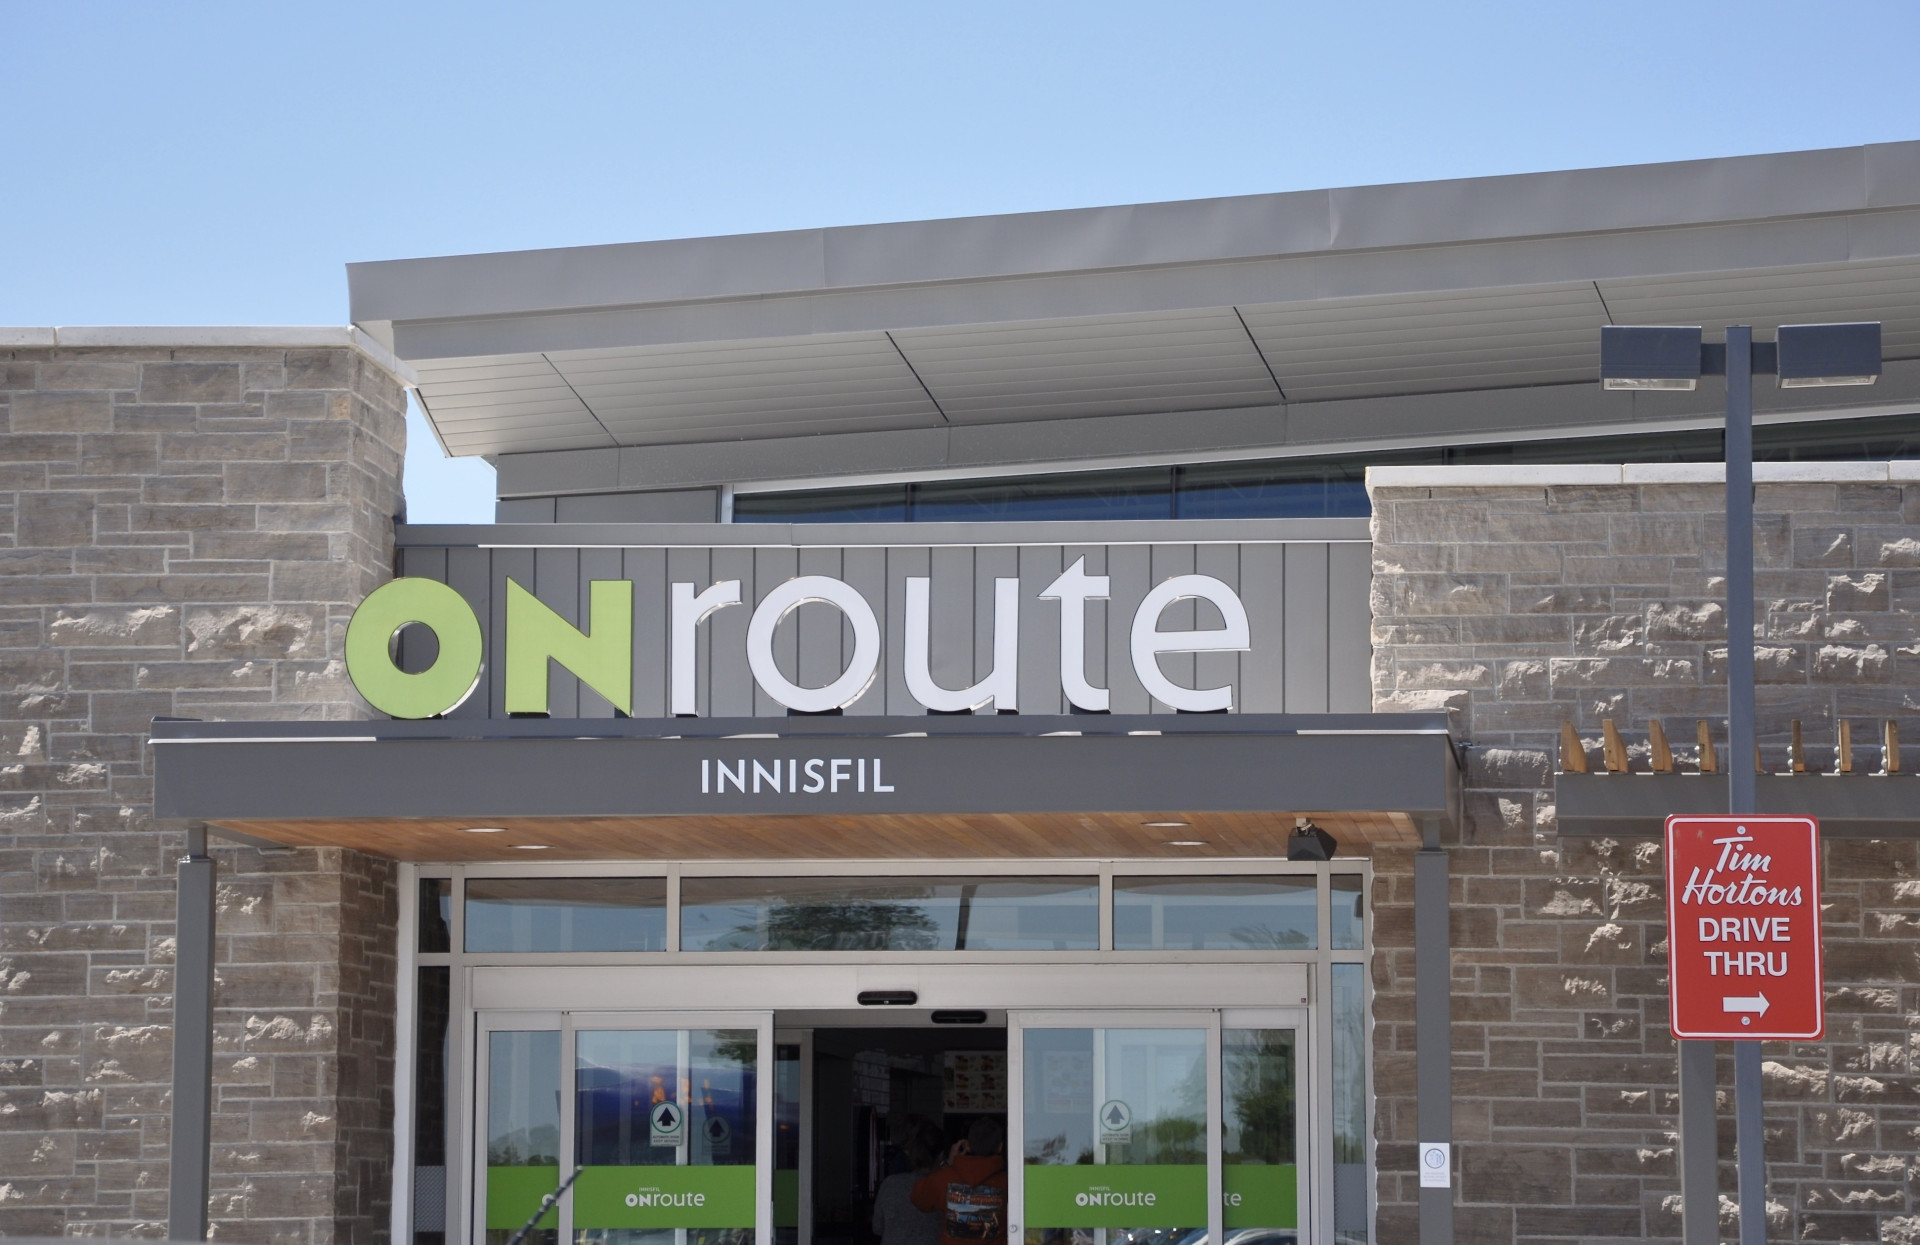 The road hugs the coast of Lake Huron and you won't get bored of the view as the dense urban centre unravels into forested landscape. Make sure to stop at an ONRoute for some Tim Hortons to get the full Canadian road-trip experience!<p><a href="https://www.msn.com/en-us/community/channel/vid-7xx8mnucu55yw63we9va2gwr7uihbxwc68fxqp25x6tg4ftibpra?cvid=94631541bc0f4f89bfd59158d696ad7e">Follow us and access great exclusive content every day</a></p>